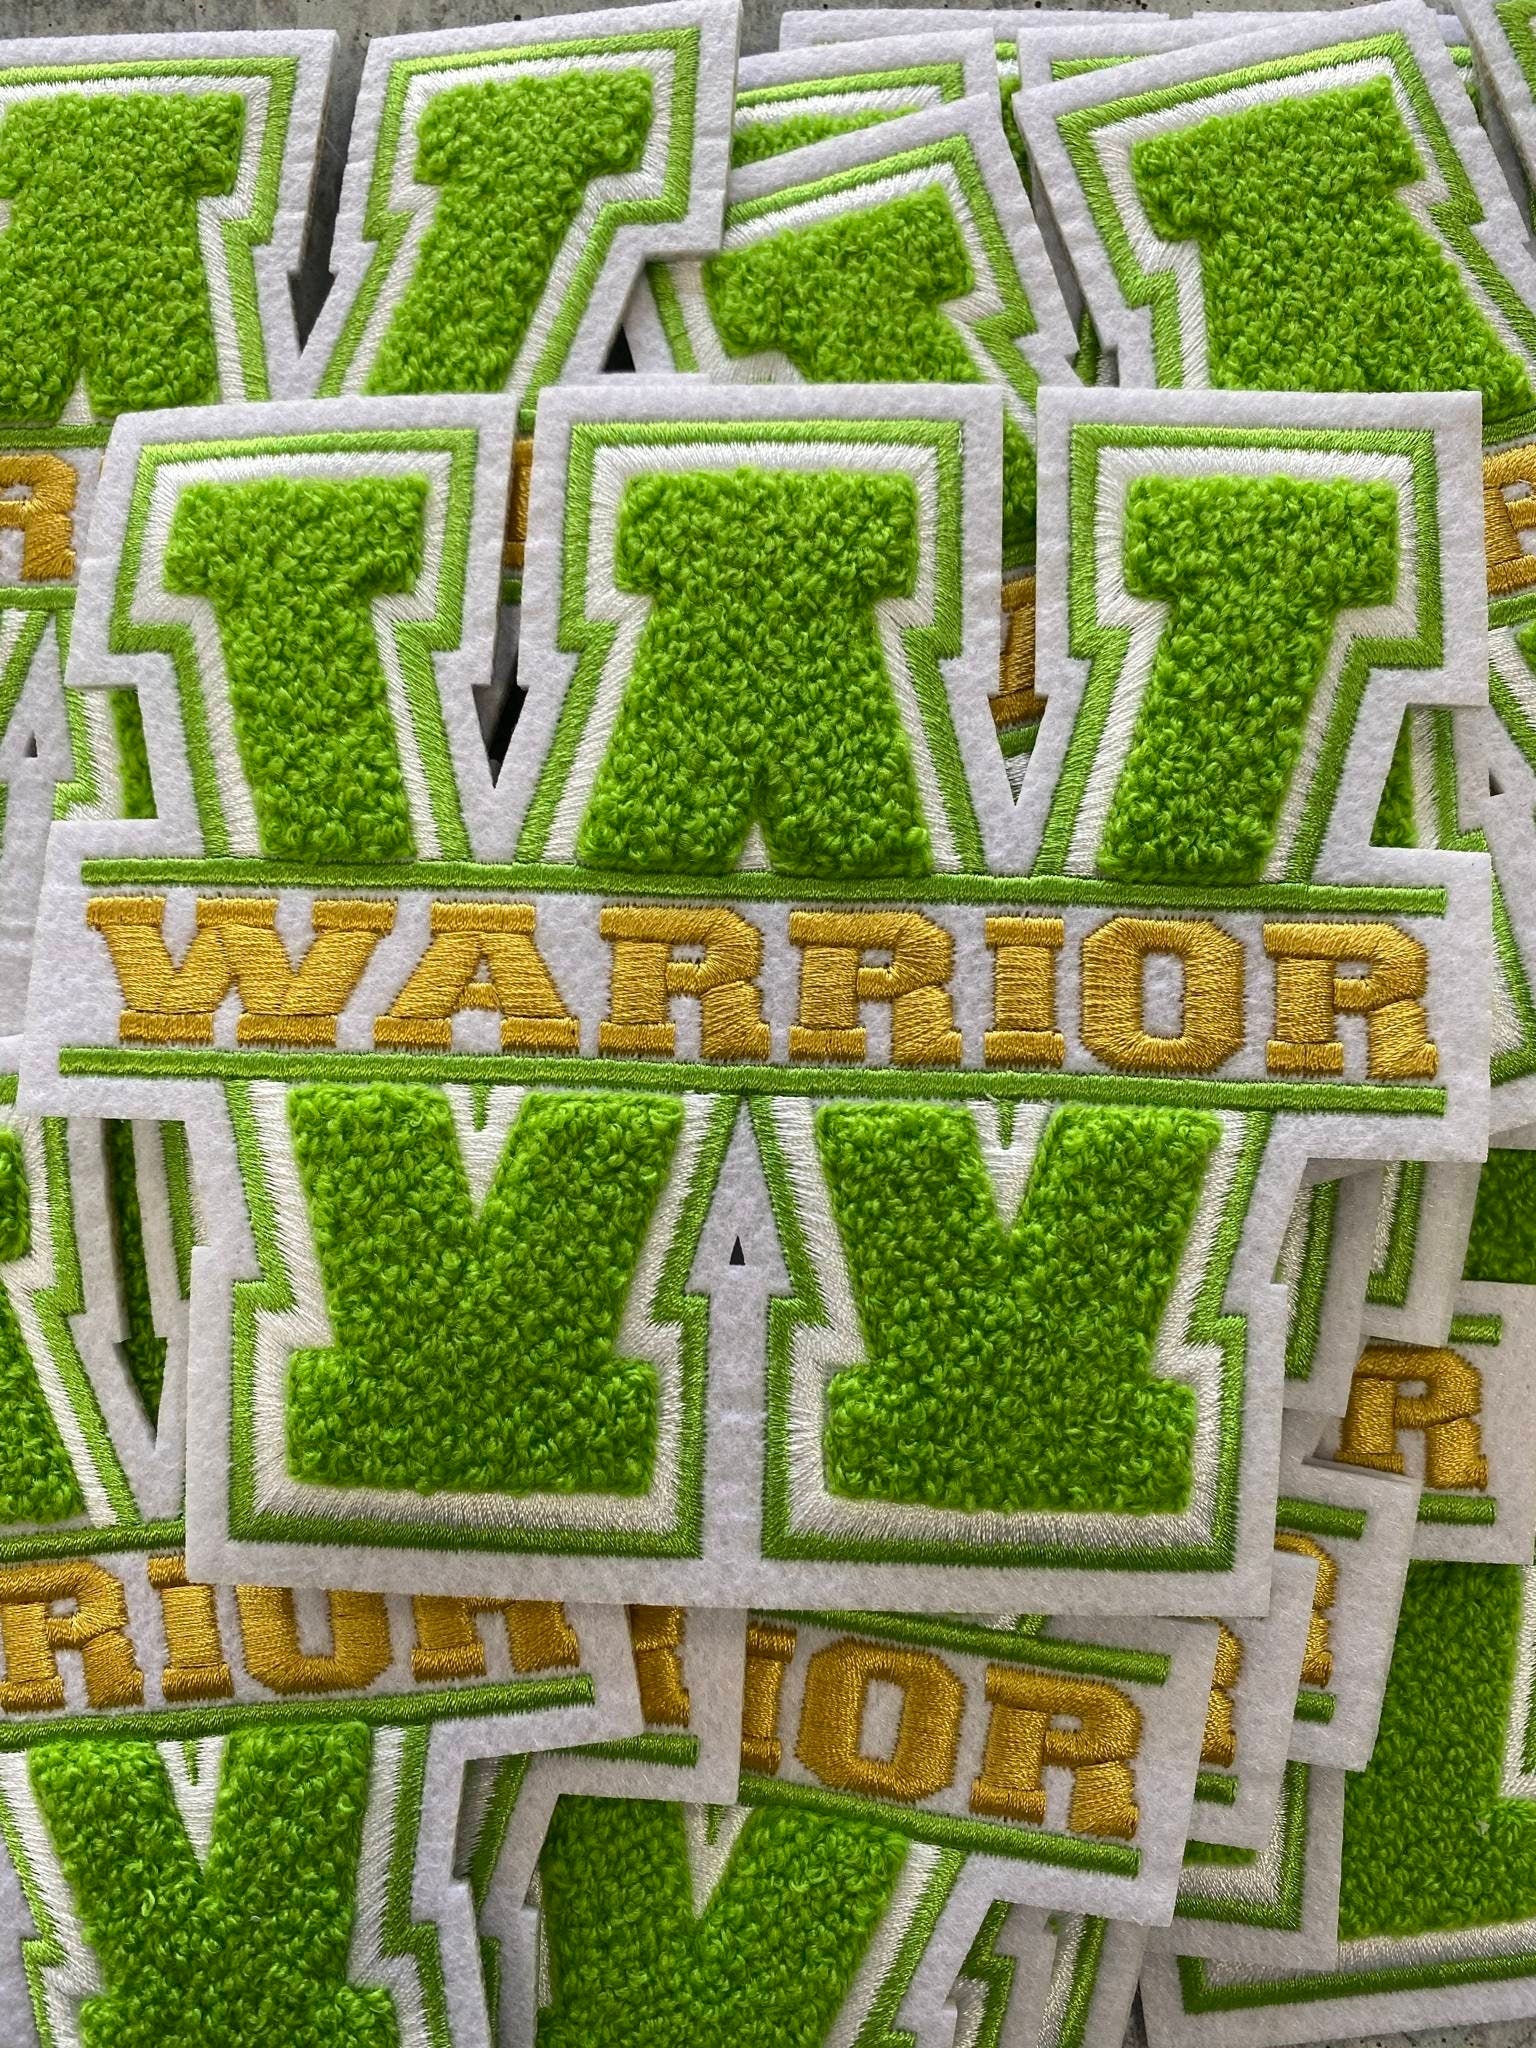 New, 1-pc, Monogram Letter, "W" Royalty, Chenille Iron-on Patch, Size 6", Green|Gold|White, Varsity Patch for Jackets and More